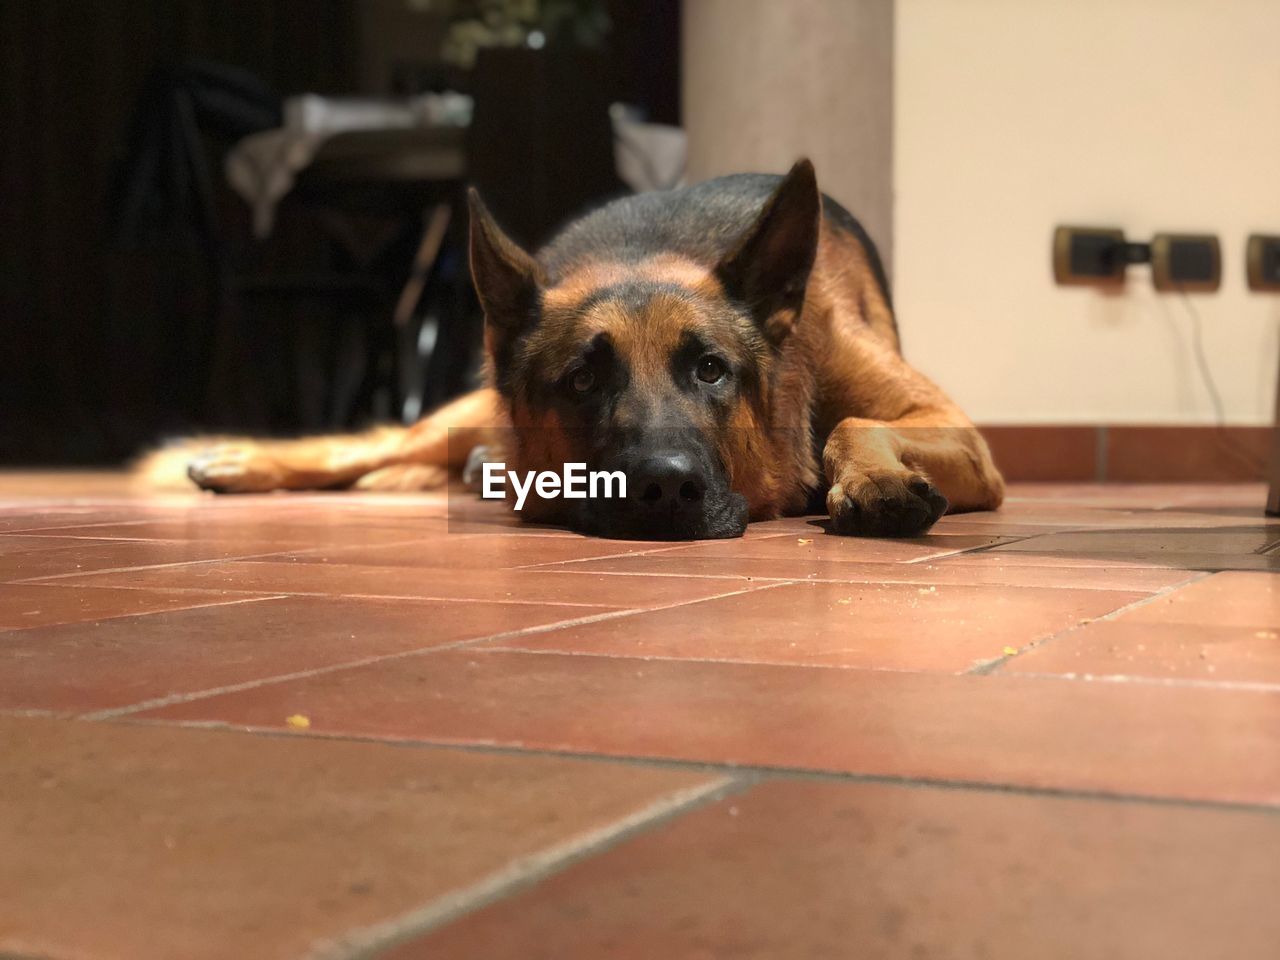 Dog relaxing on tiled floor at home